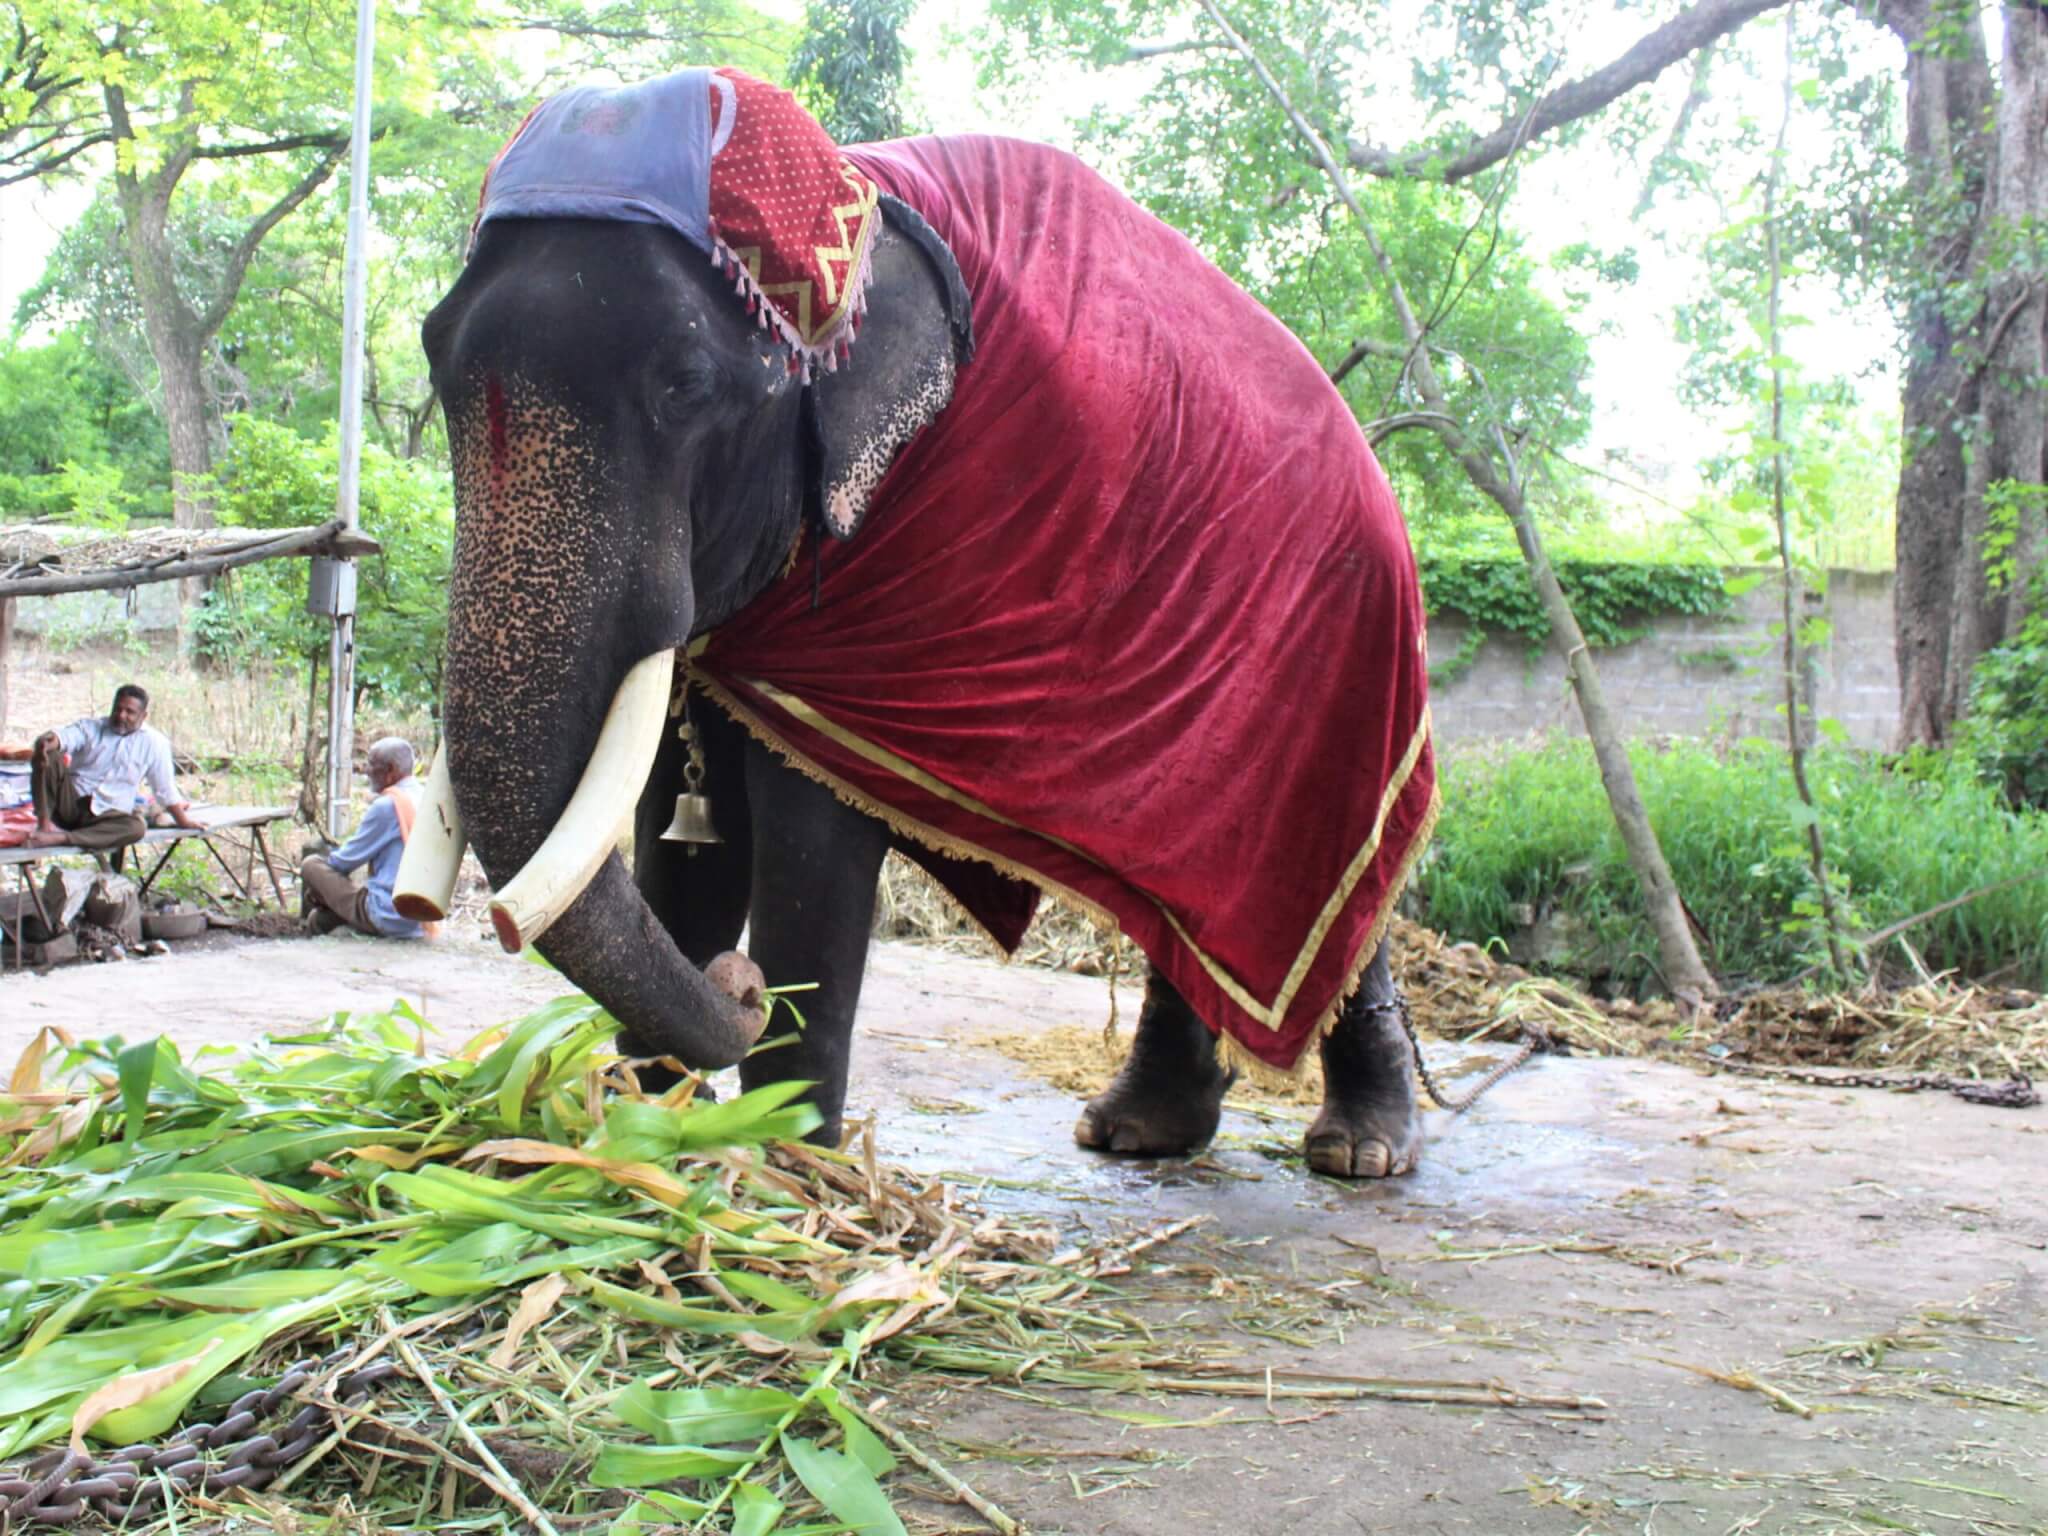 Gajraj is chained and draped in cloths at the temple that held him captive for more than 50 years.